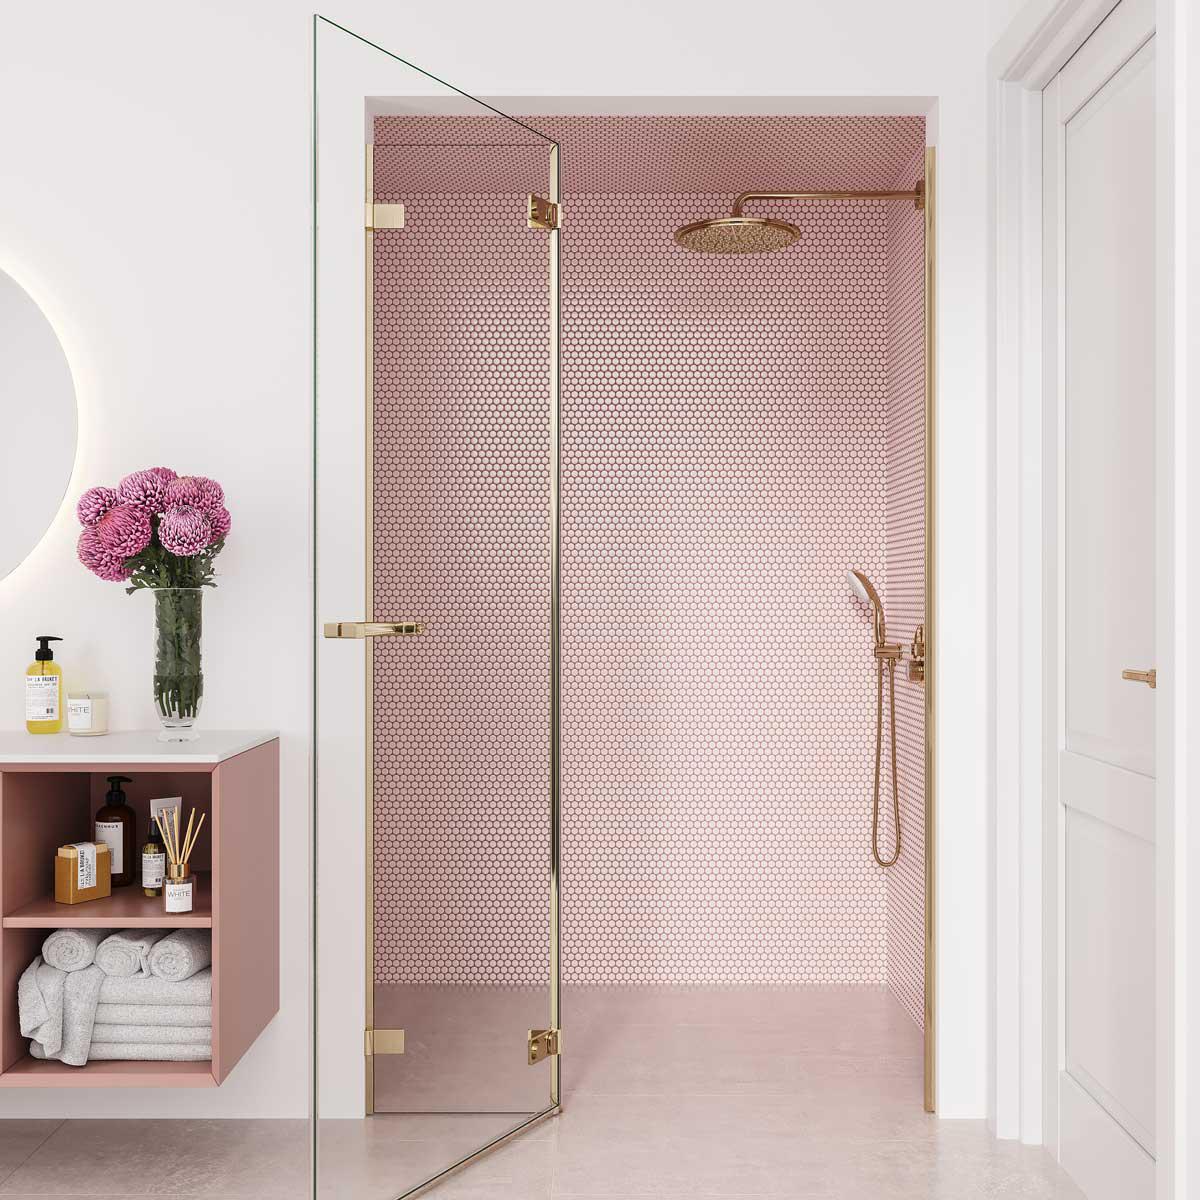 White and Gold Bathroom with Pink Buttons penny shower tile